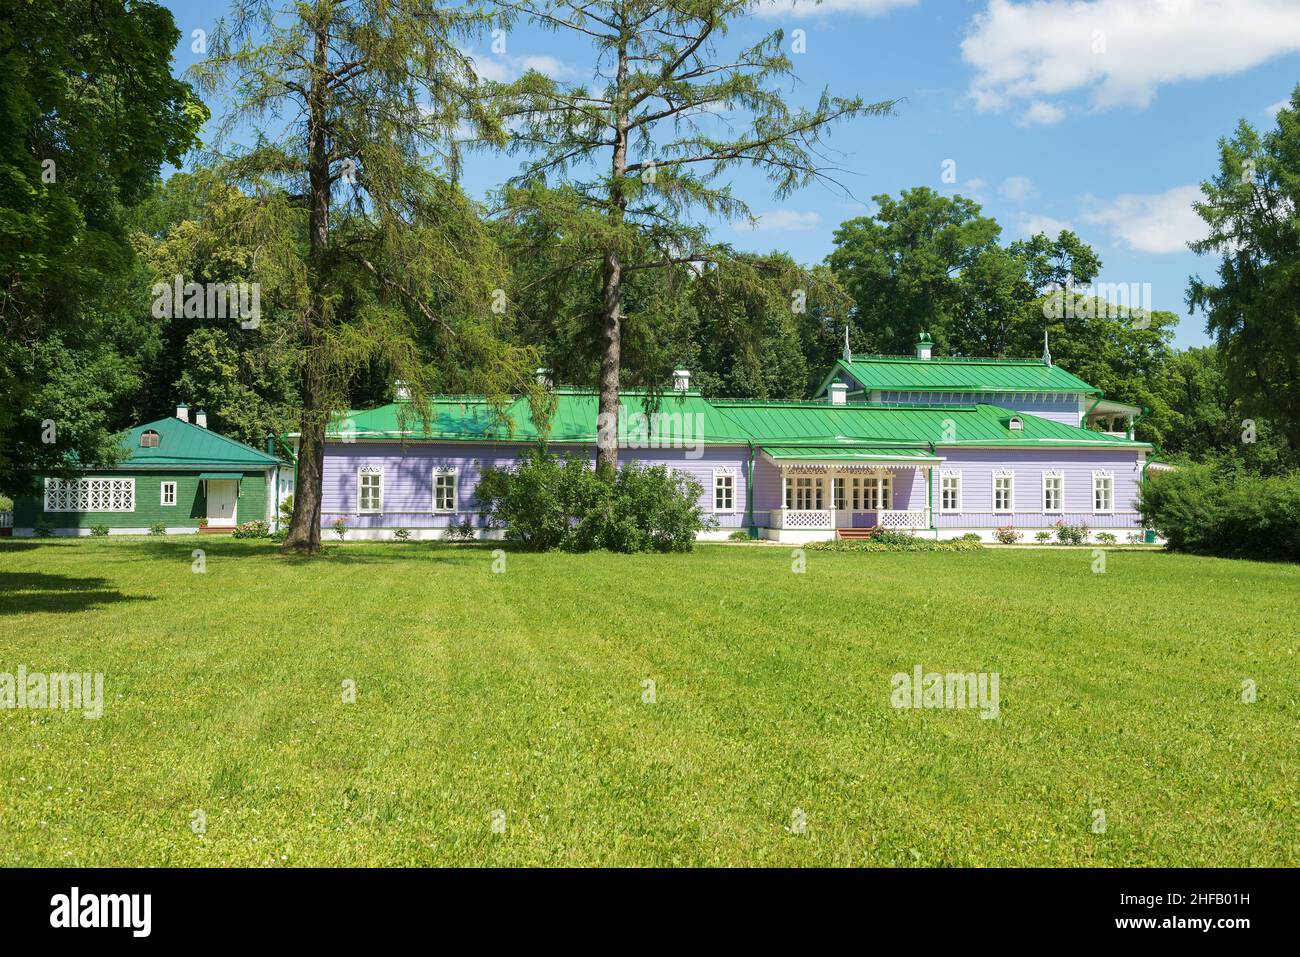 SPASSKOE-LUTOVINOVO, RUSSIA - JULY 06, 2021: View of the manor house in the estate of the mother of the Russian writer Turgenev 'Spasskoye-Lutovinovo' Stock Photo